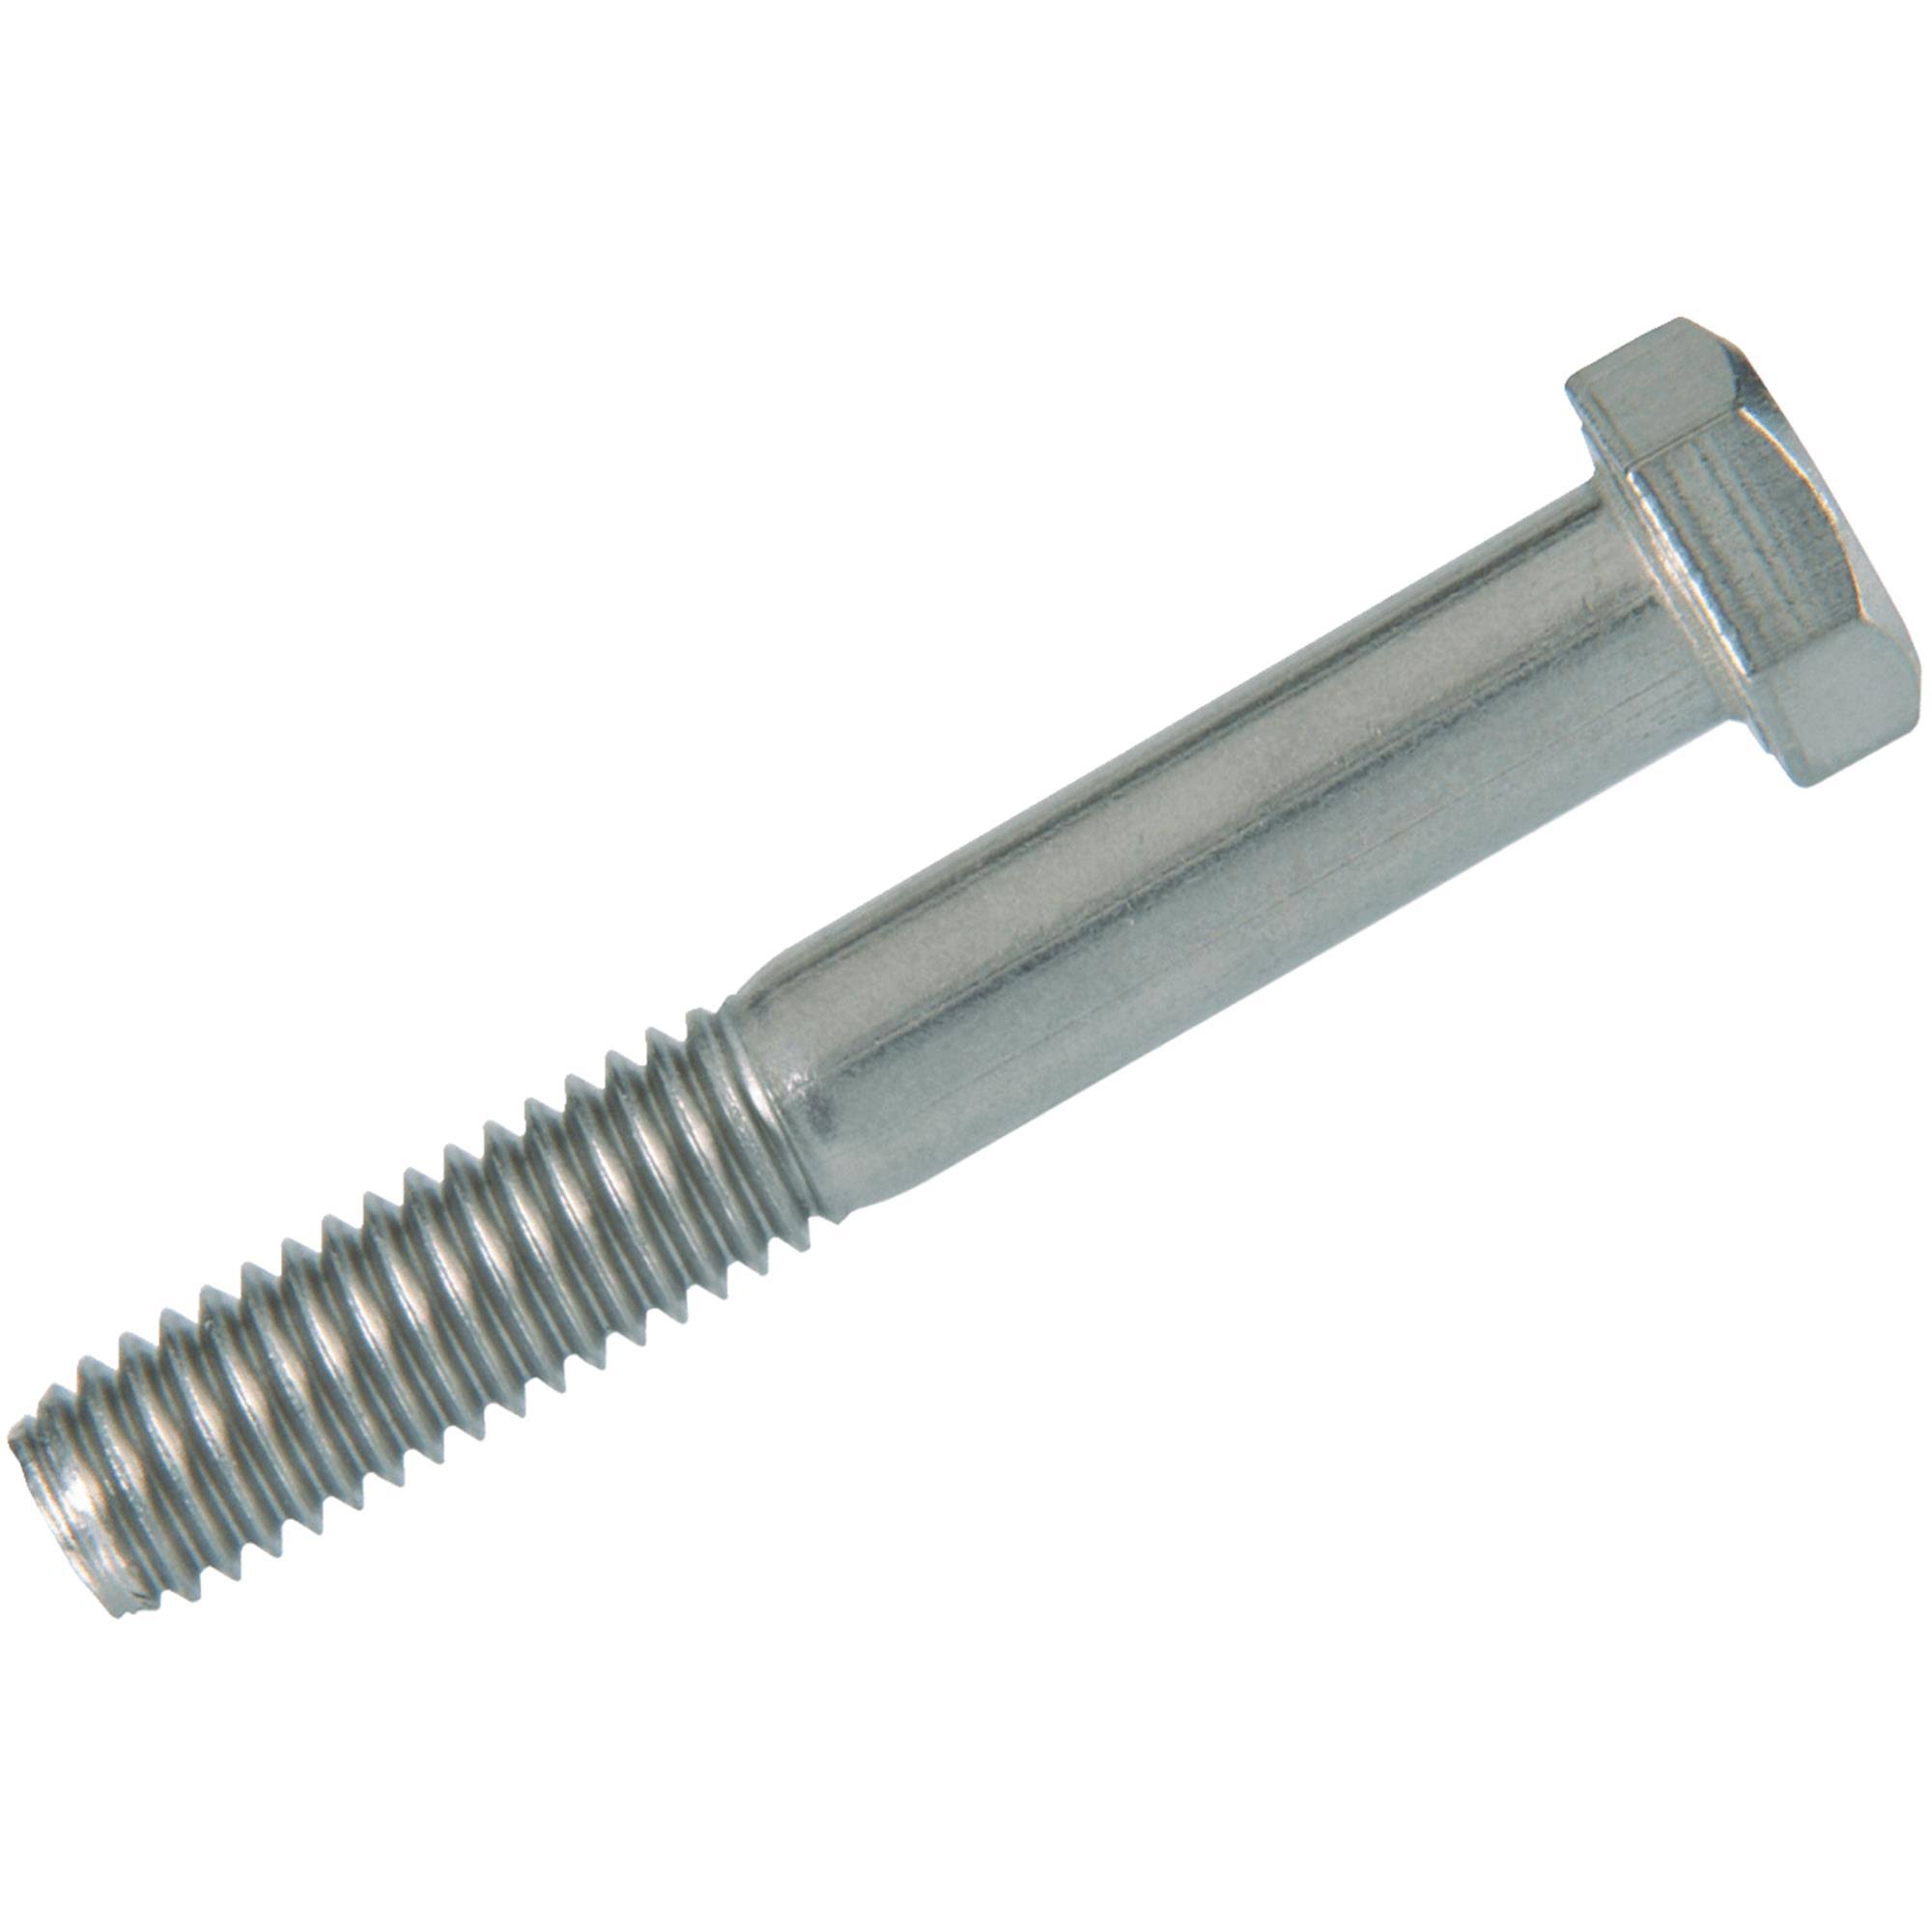 The Hillman Group 831618 Stainless Steel Hex Cap Screw - 50pk, 3/8-16"x1"